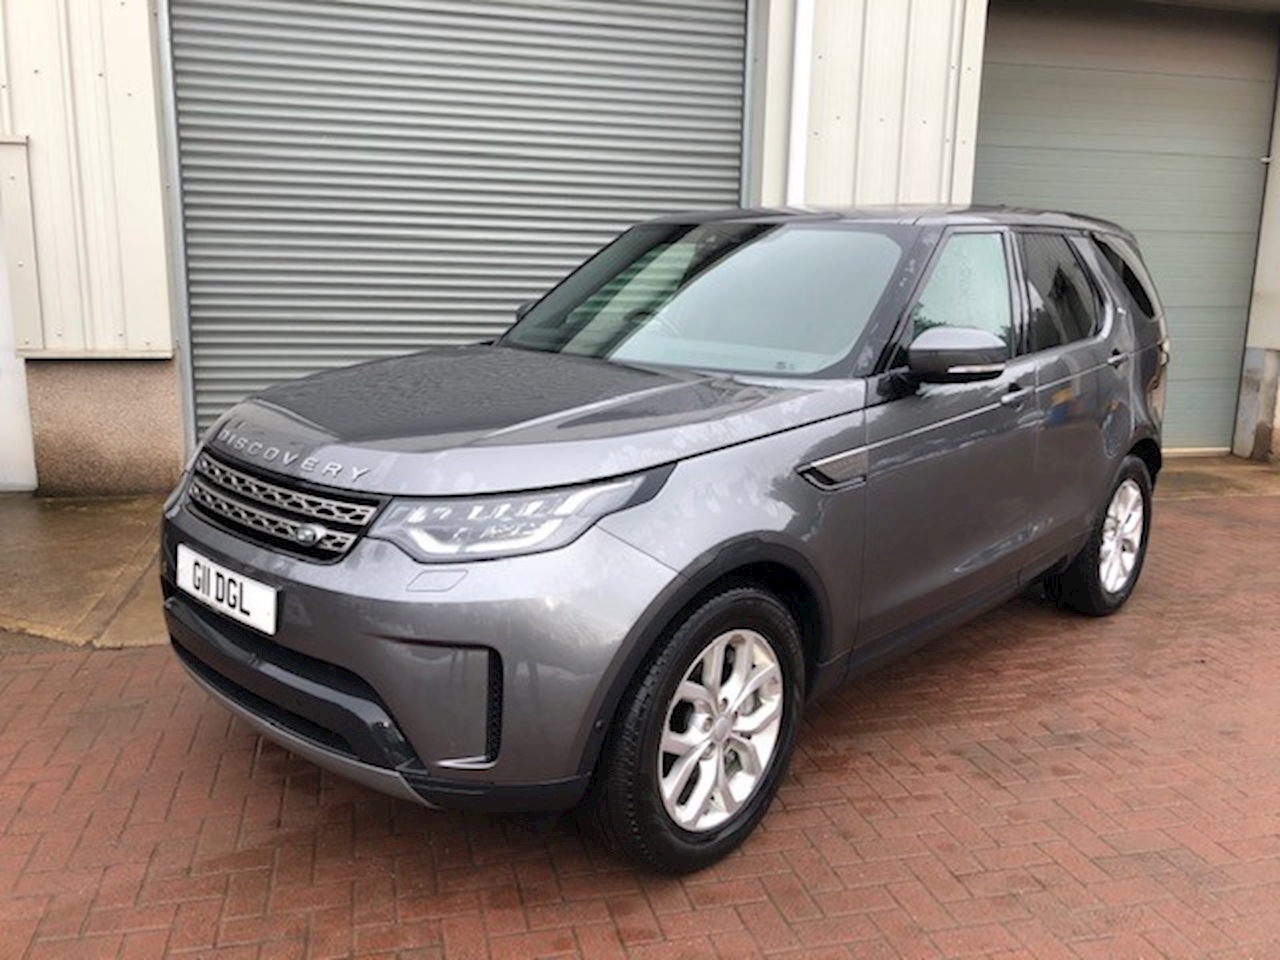 Discovery Sdv6 Commercial Se Panel Van 3.0 Automatic Diesel